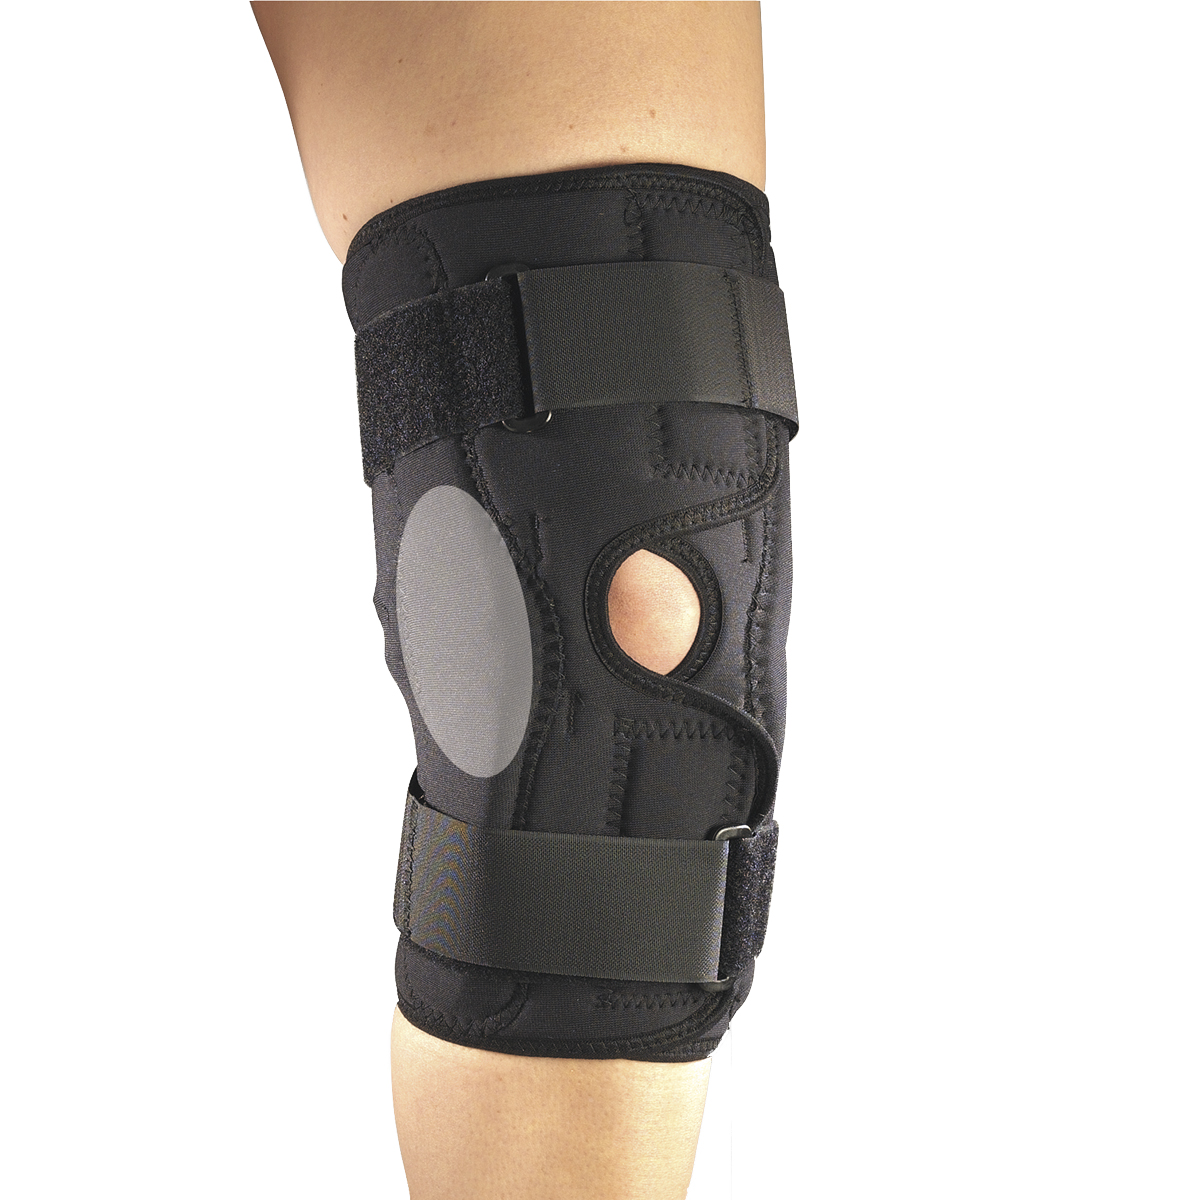 Orthotex Knee Stabilizer Wrap with ROM Hinged Bars - J&B At Home